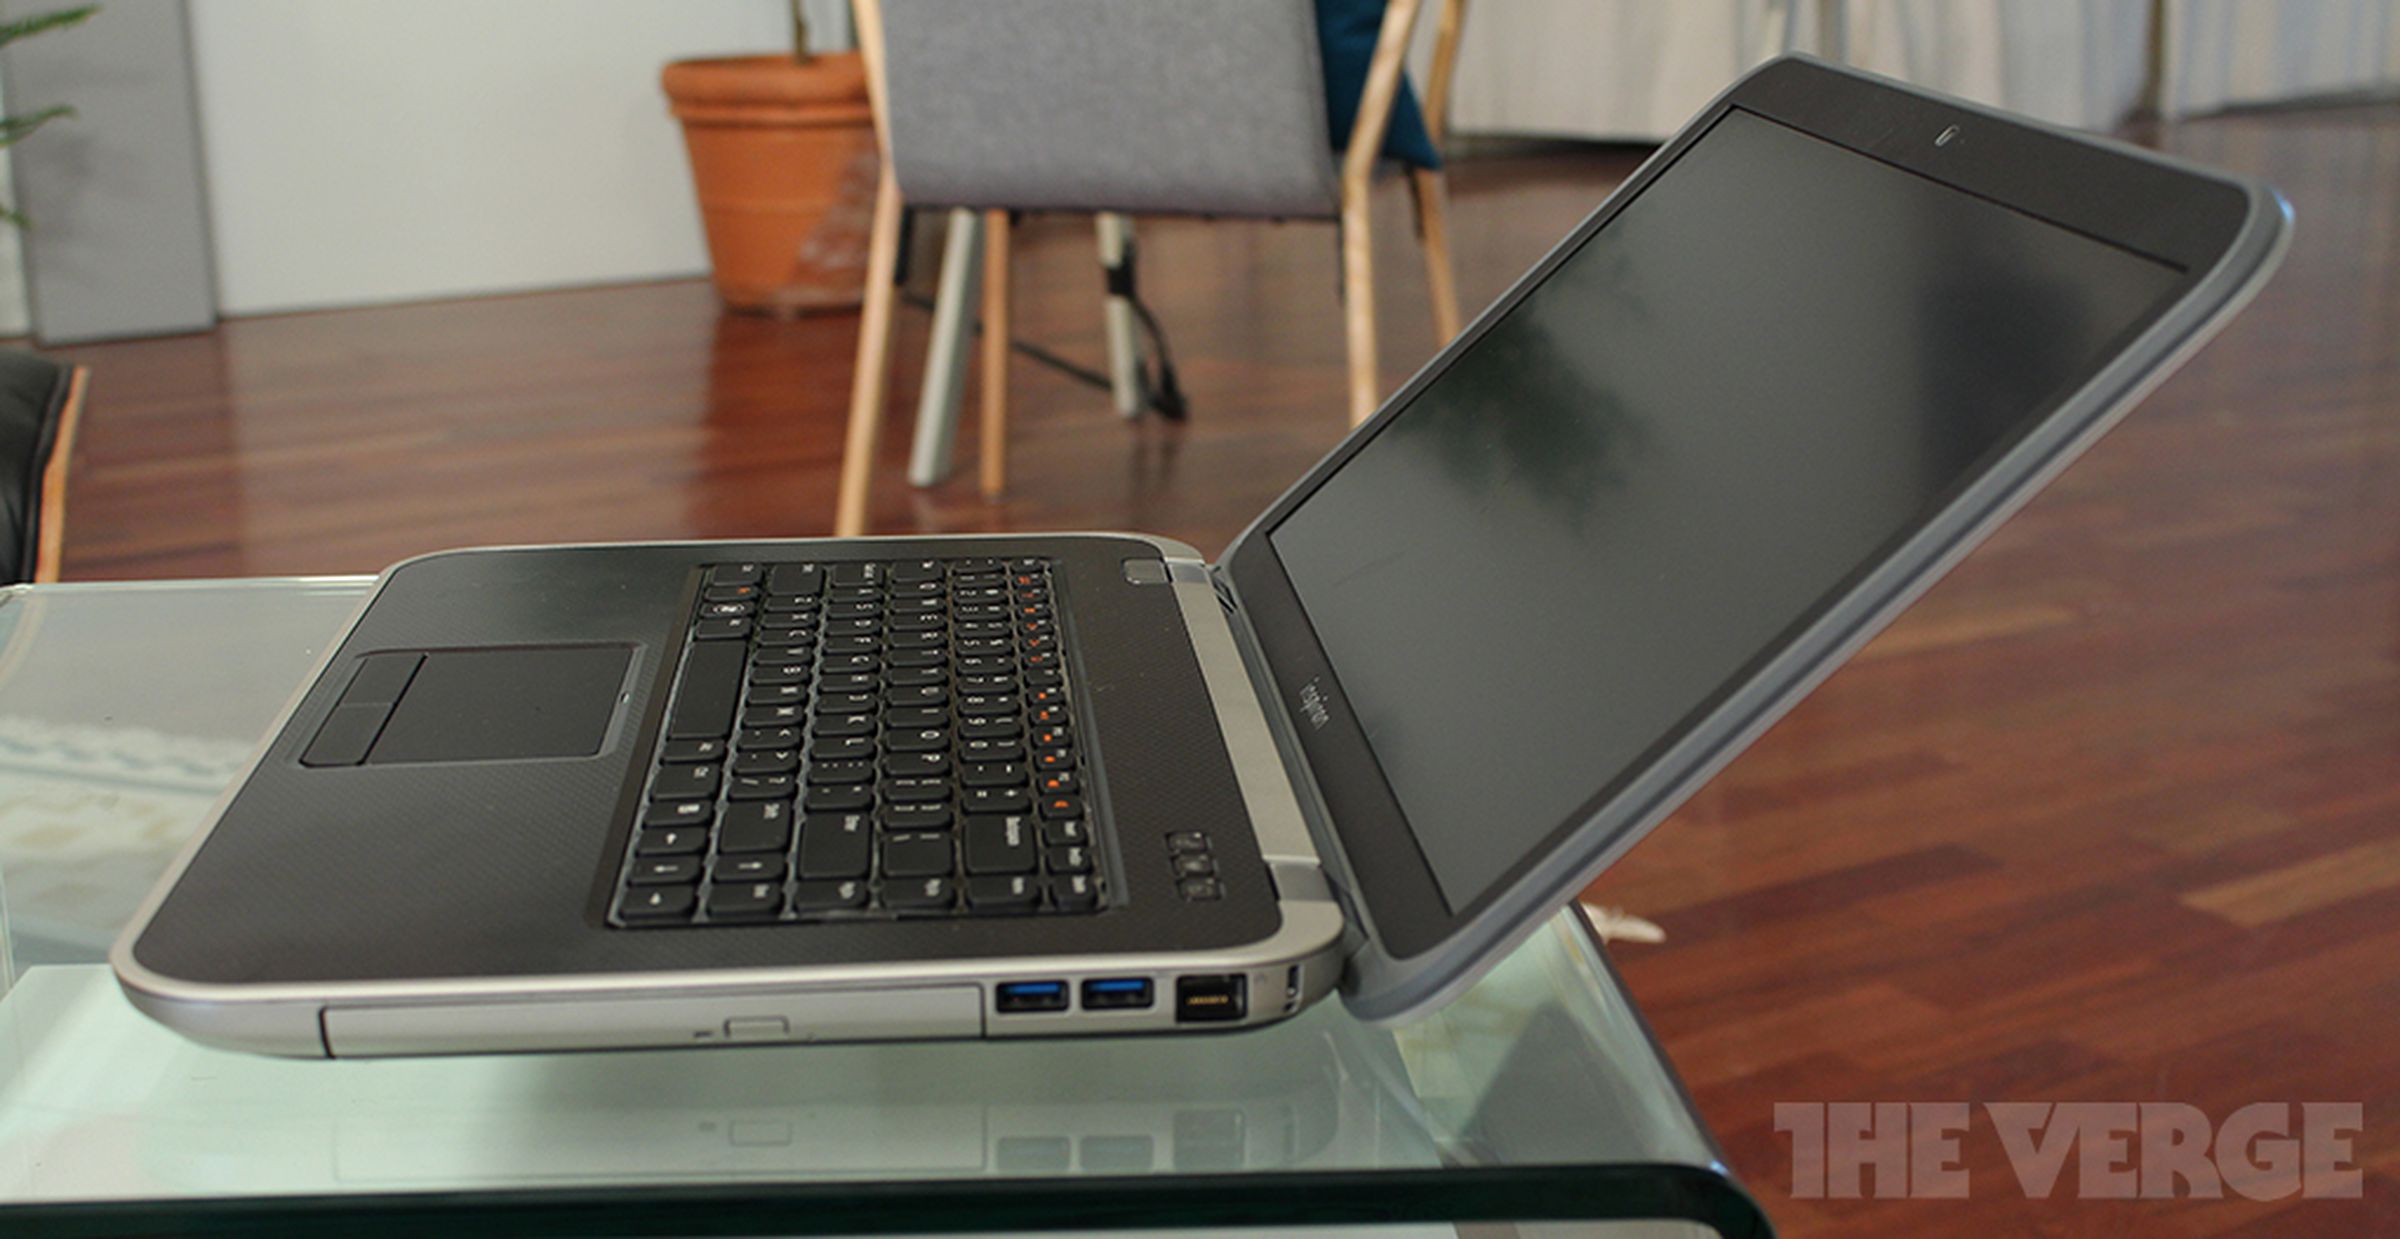 Dell Inspiron R and Special Edition hands on pictures